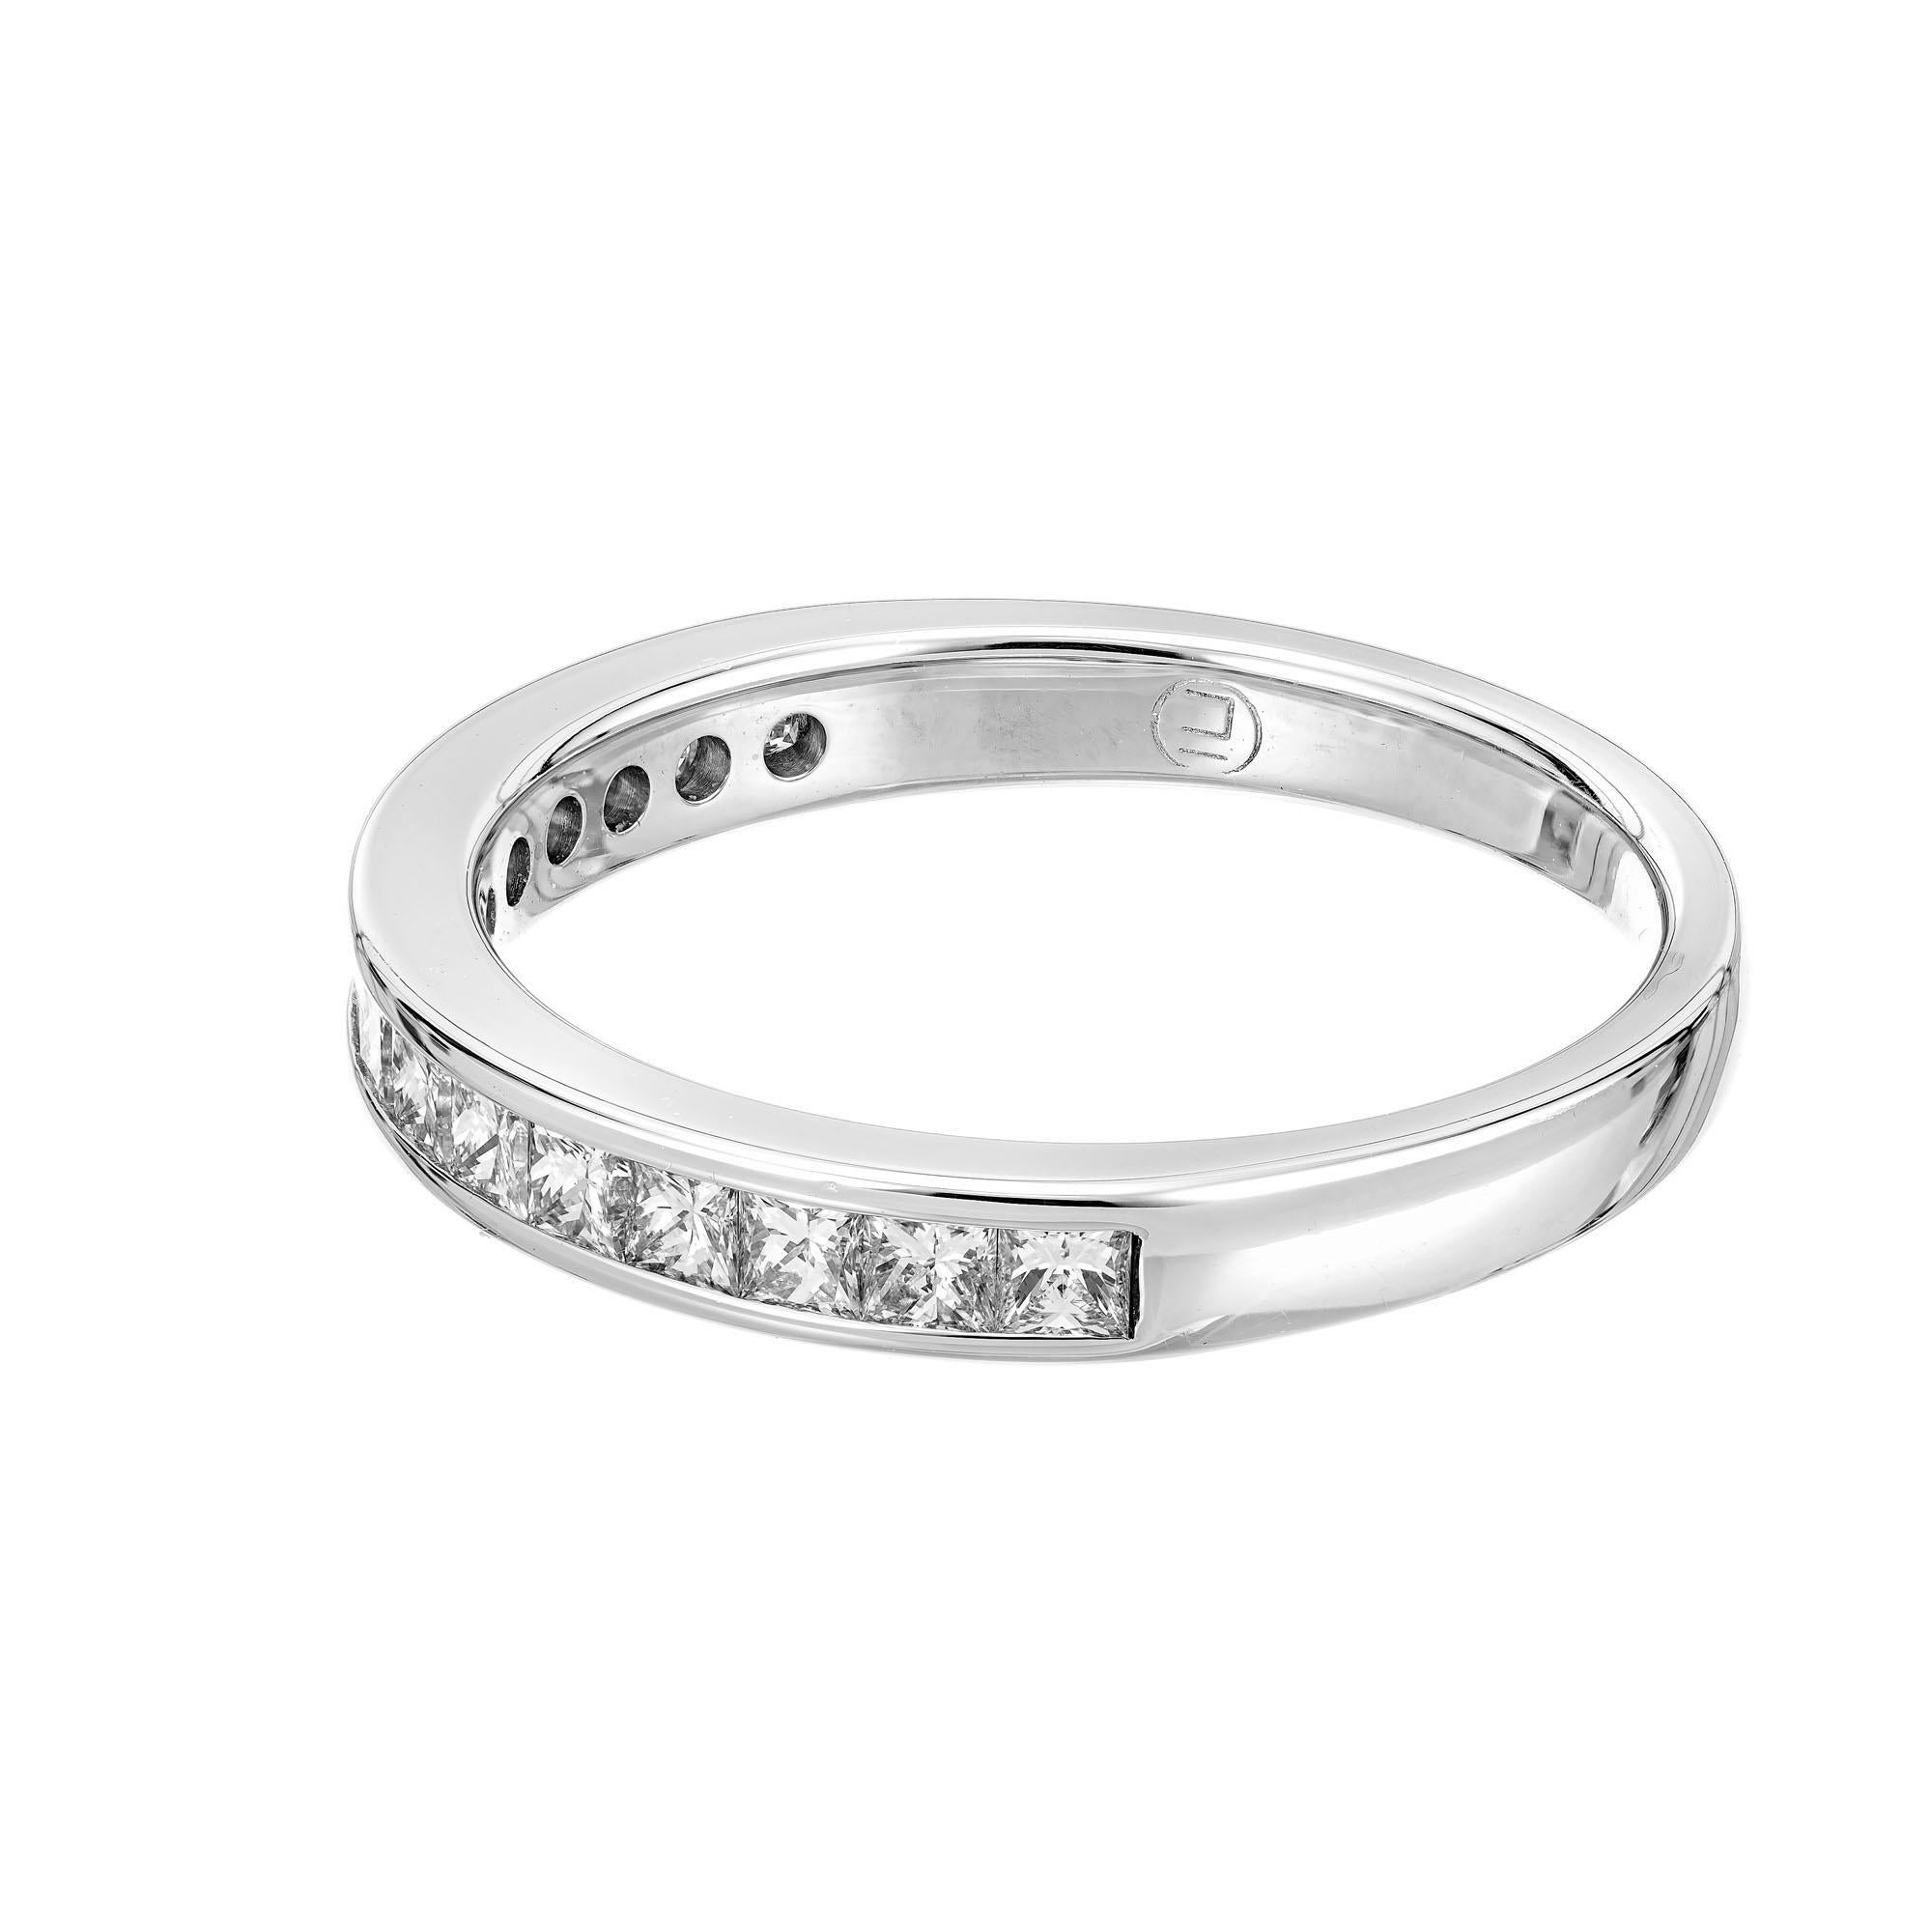 .50 Carat Diamond White Gold Wedding Band Ring In Excellent Condition For Sale In Stamford, CT